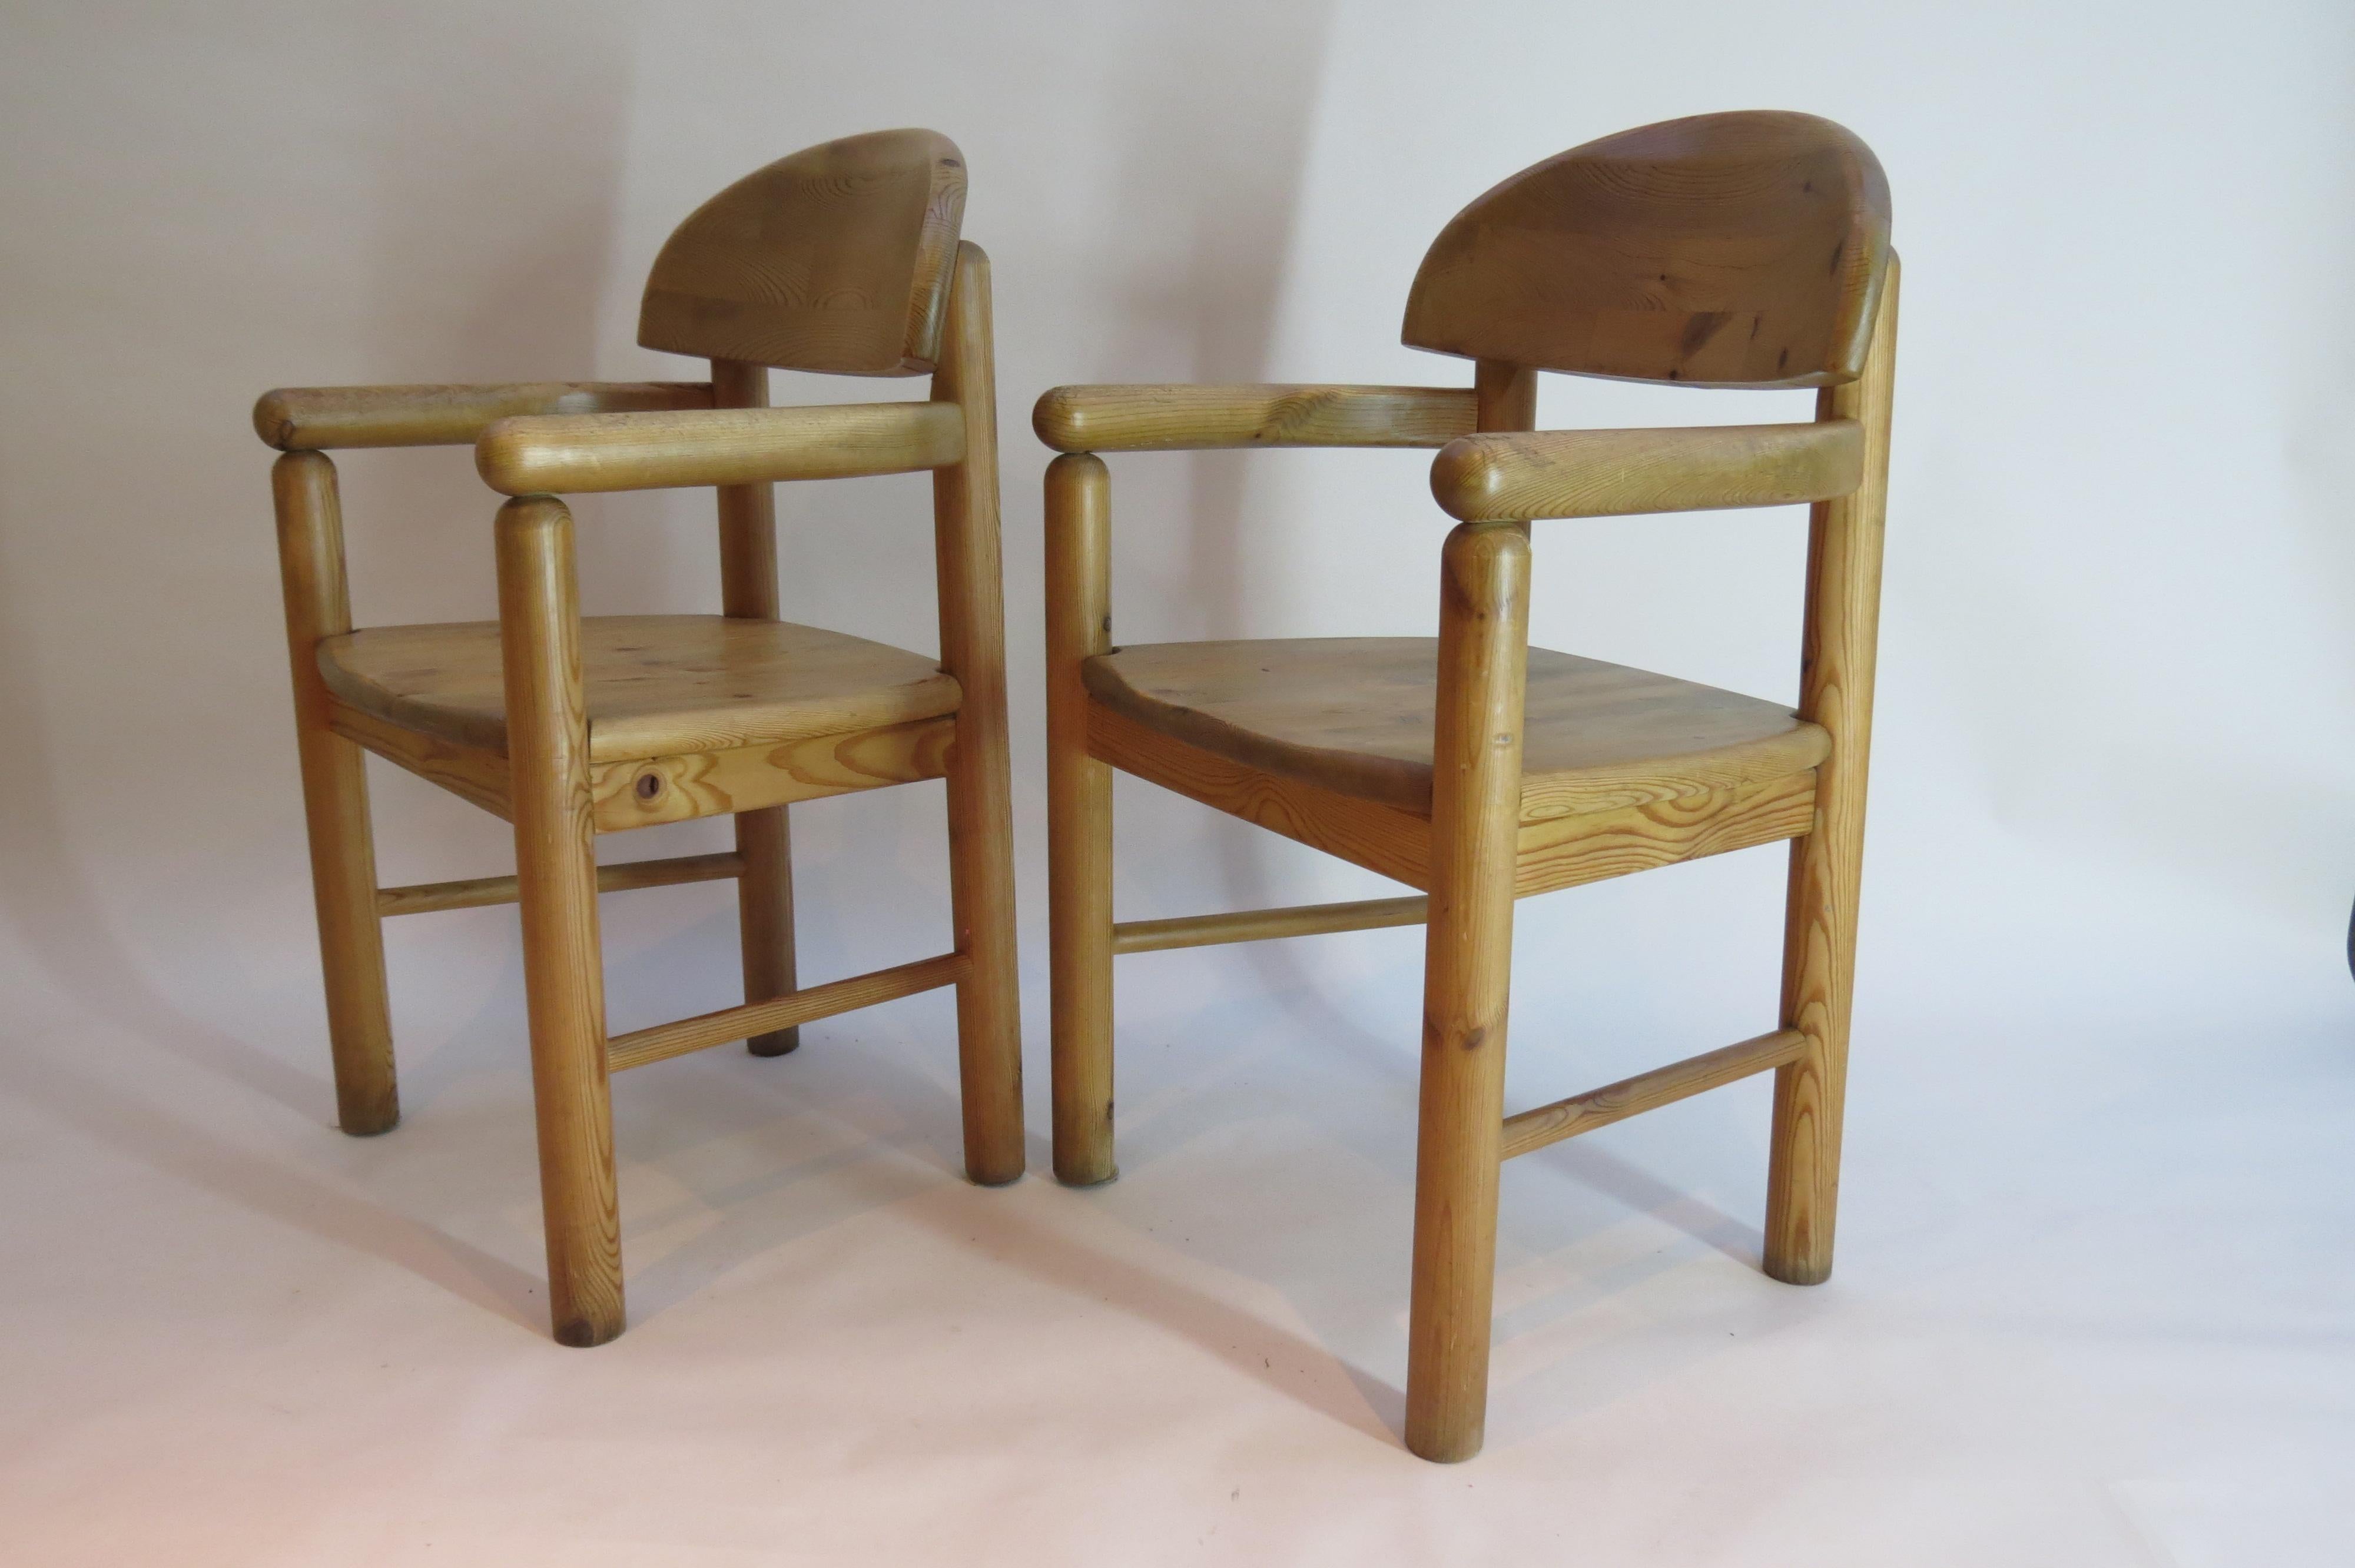 Pair of Carver dining chairs made from solid pine, designed by Rainer Daumiller, and manufactured by Hirtshals Sawmill in Denmark, circa 1970s.

Very well made solid carver chairs in good over all condition, some signs of wear to arms as shown in